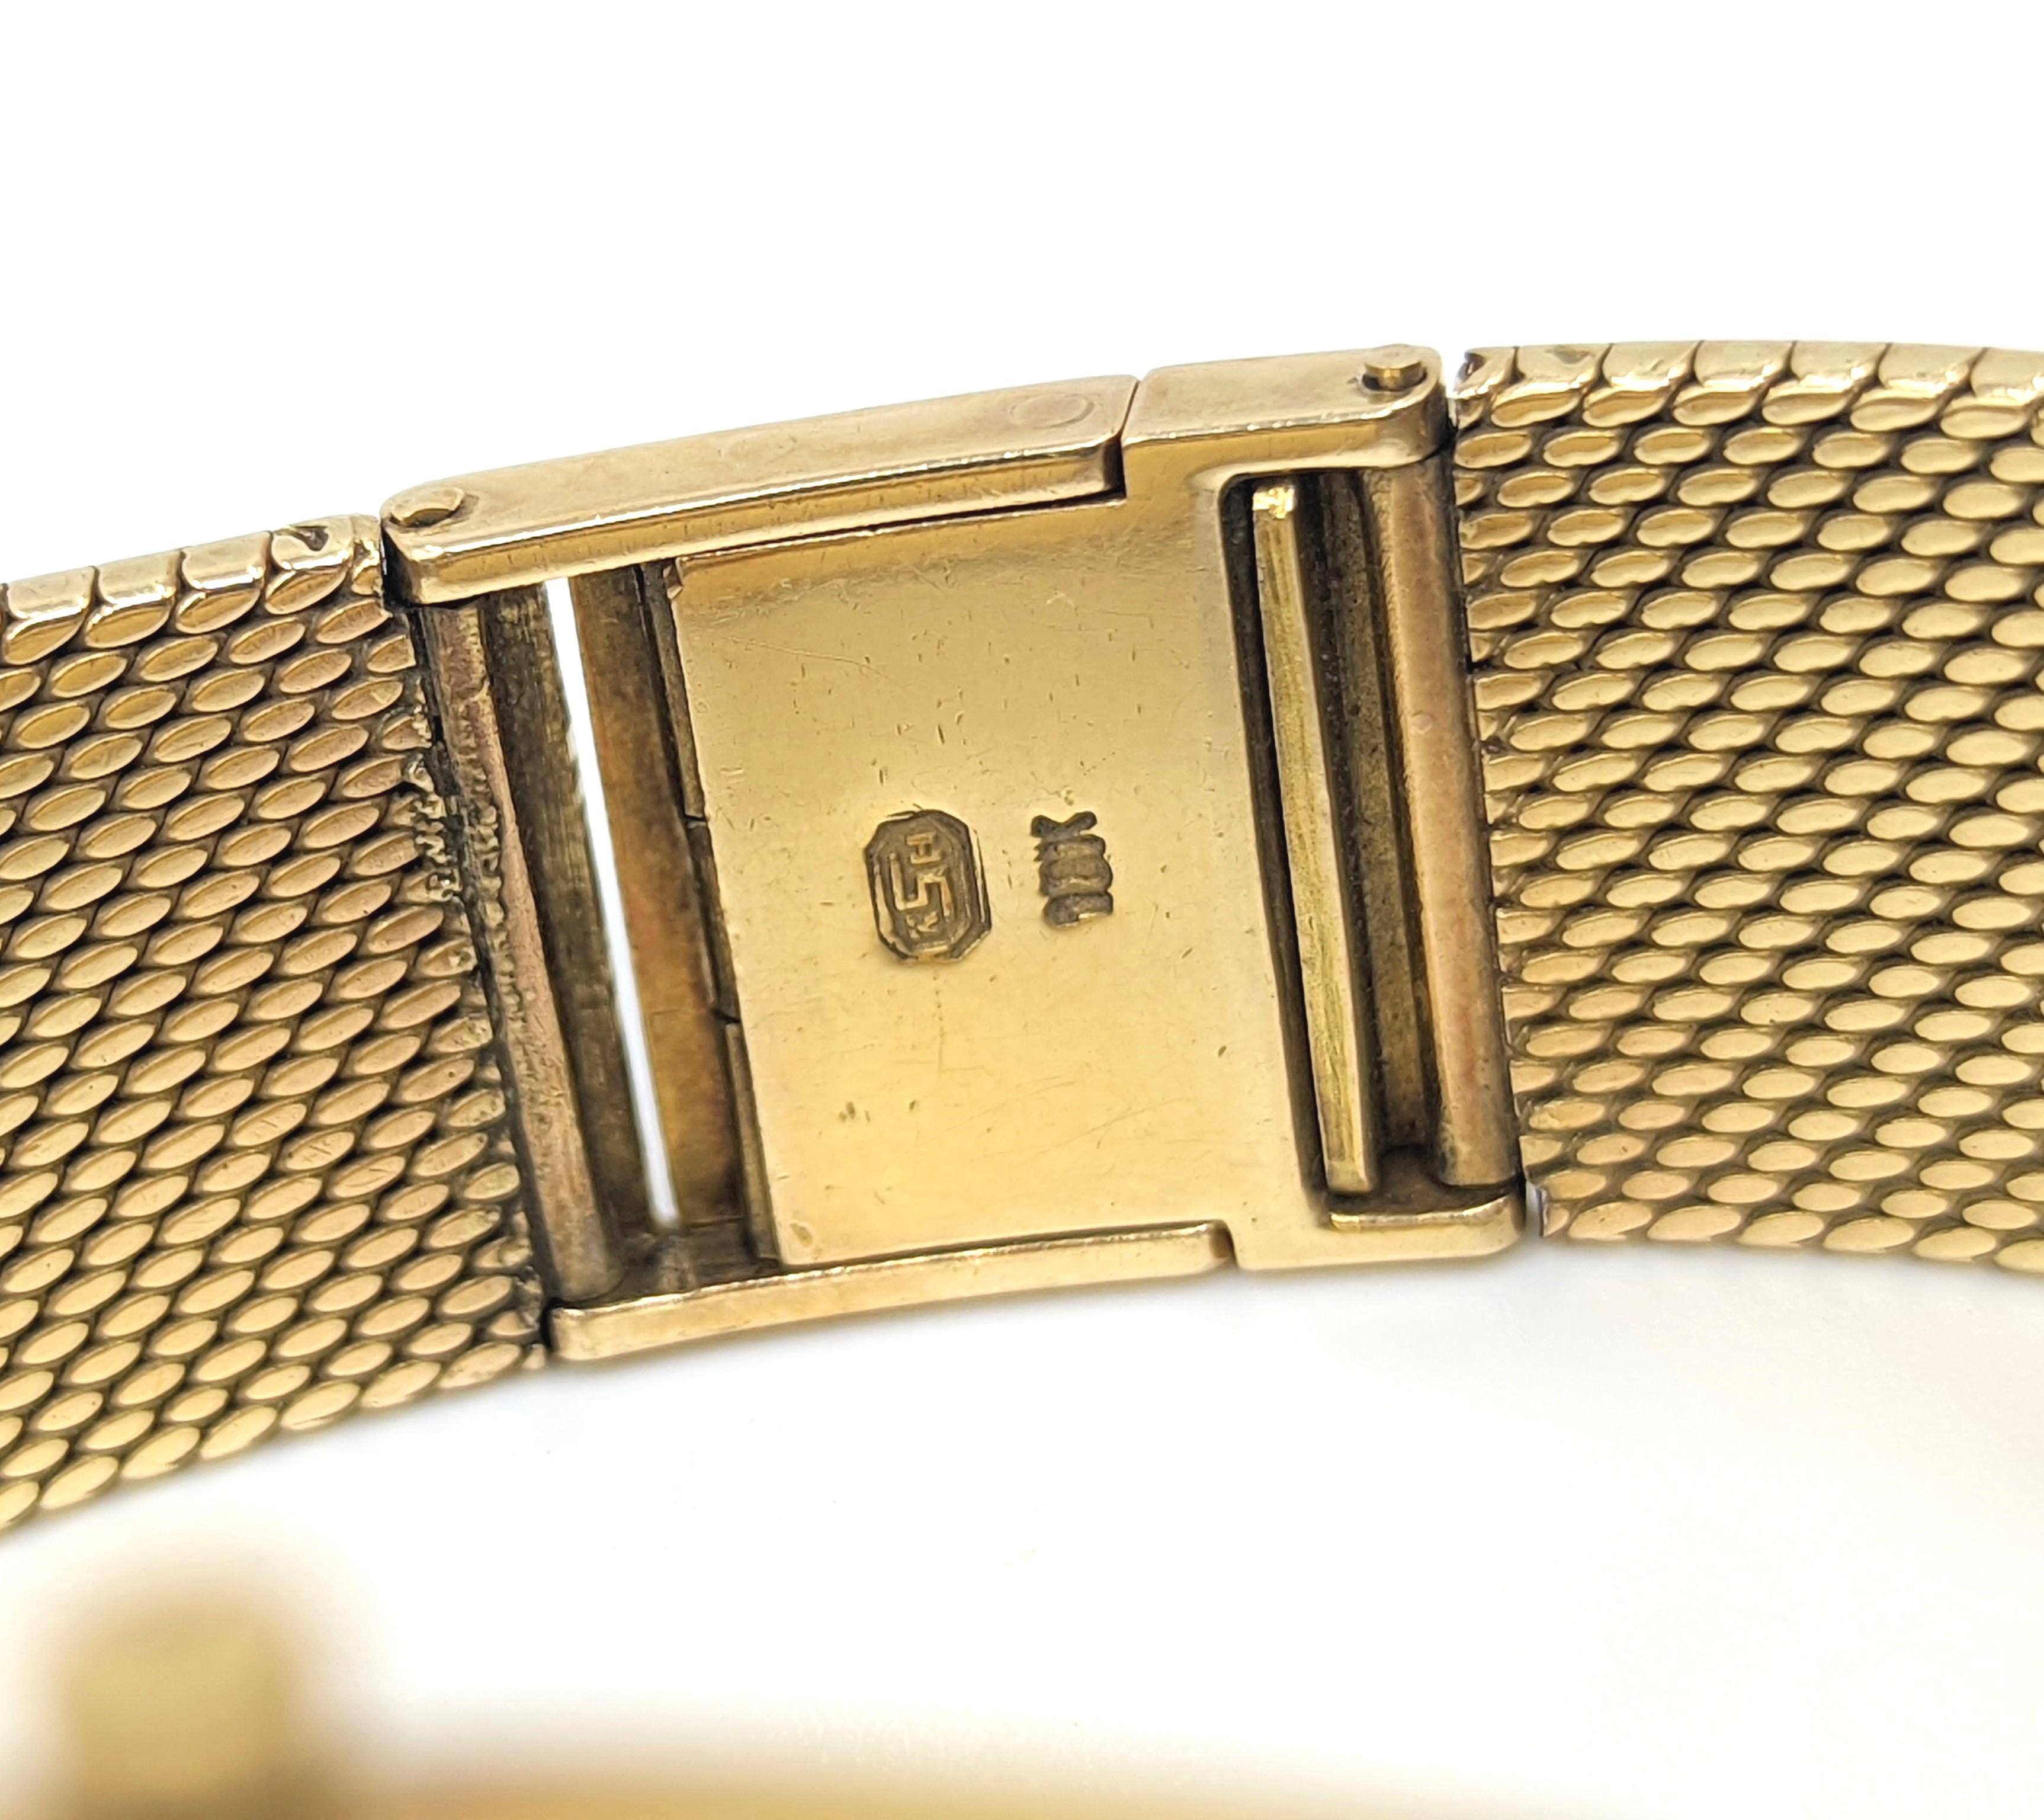 Gent's Vintage Rolex Cellini Bracelet Watch in Solid 18k Yellow Gold Ref. 3800 In Good Condition For Sale In Richmond, CA